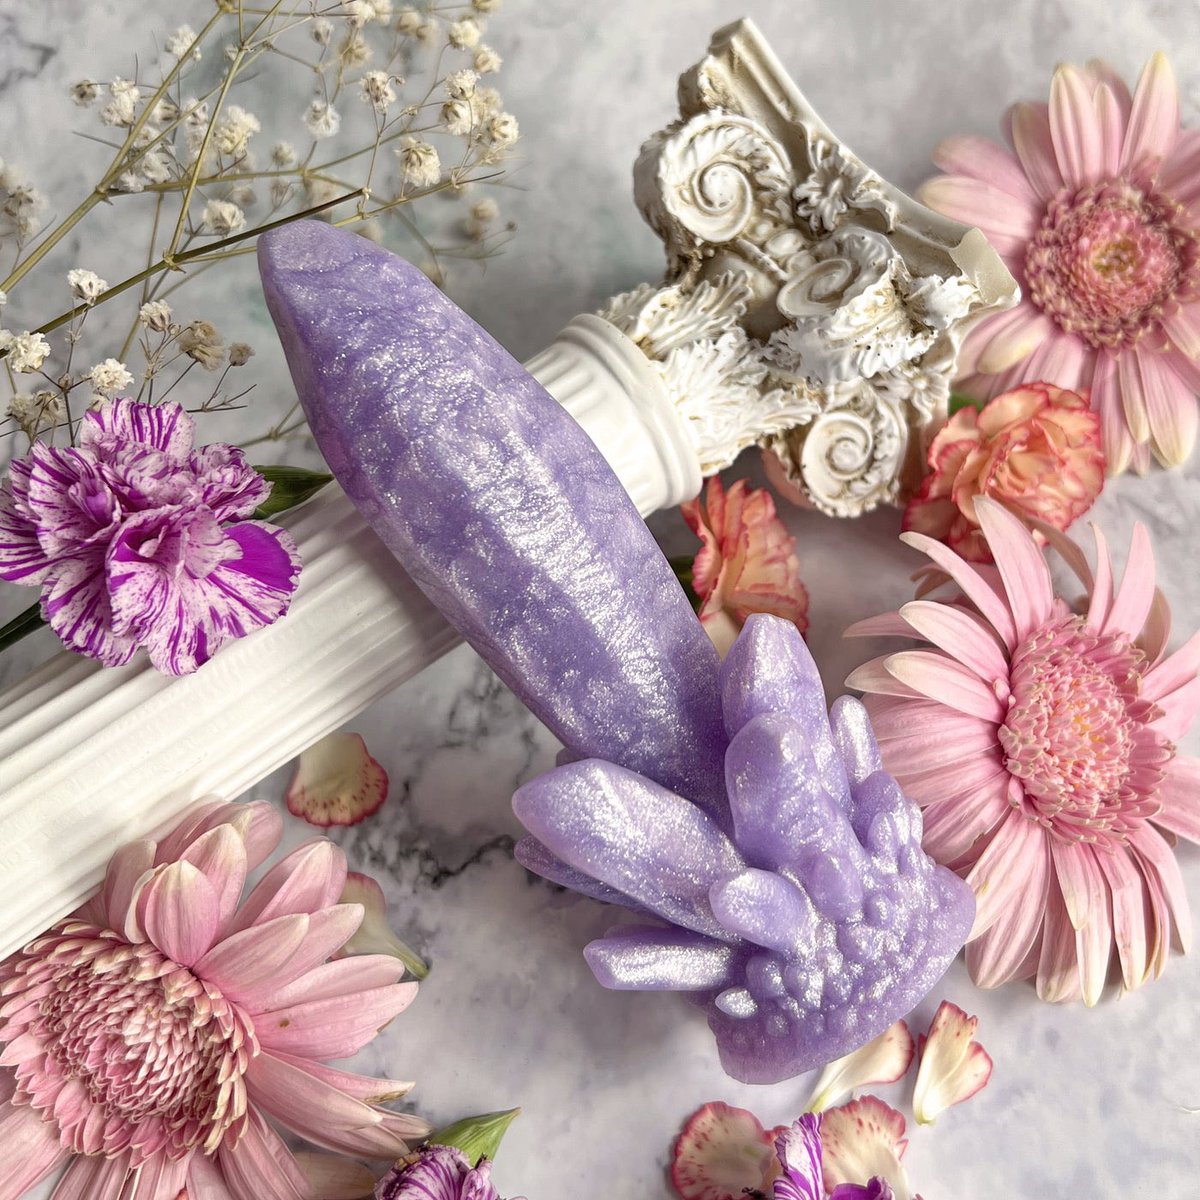 🌸To celebrate spring: -20% on the Pearly Lilac color during the month of April🪻